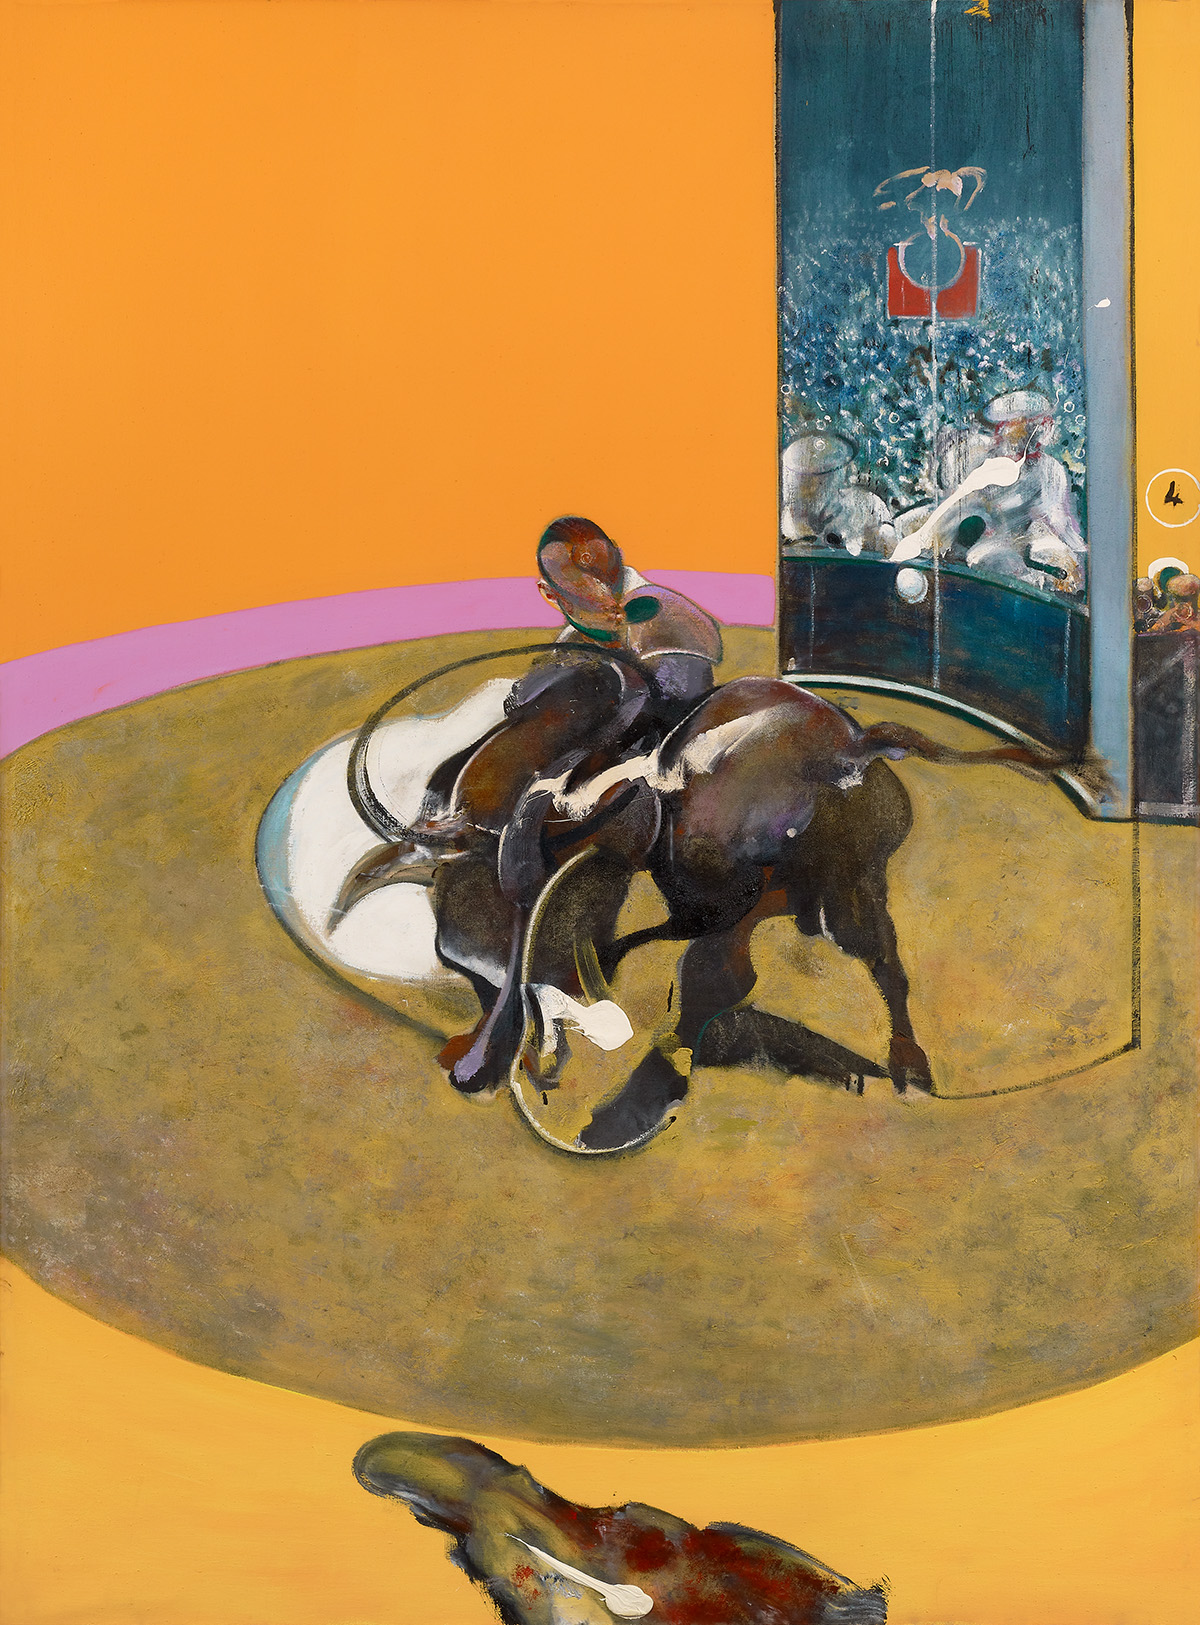 Study for Bullfight No. 1, 1969. Oil on canvas. CR no. 69-04. © The Estate of Francis Bacon / DACS London 2022. All rights reserved.